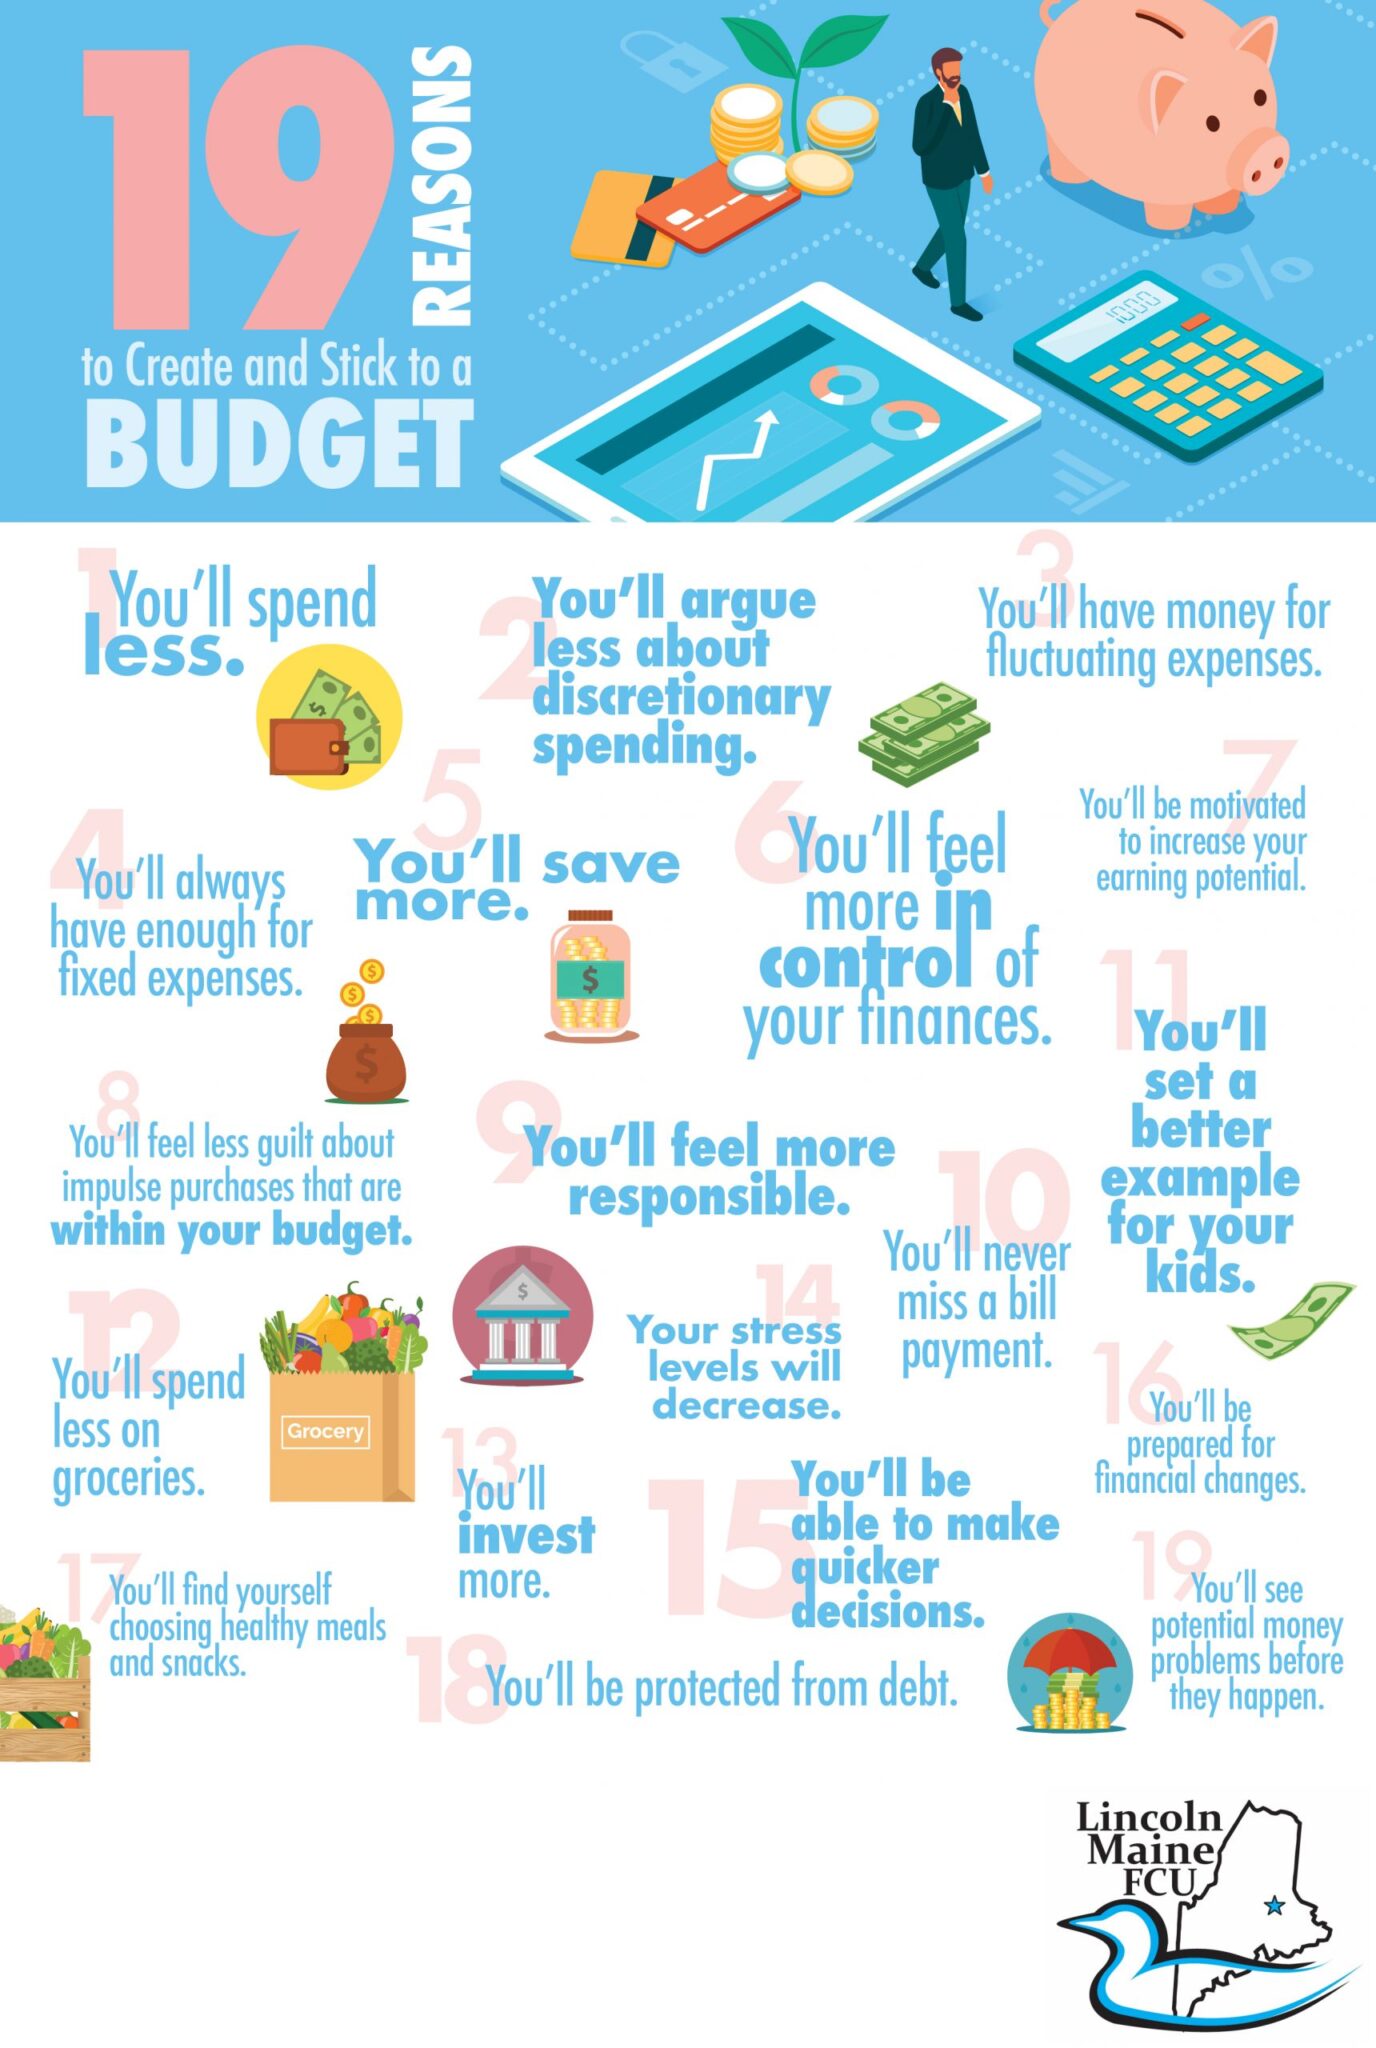 19 Reasons To Create And Stick To A Budget